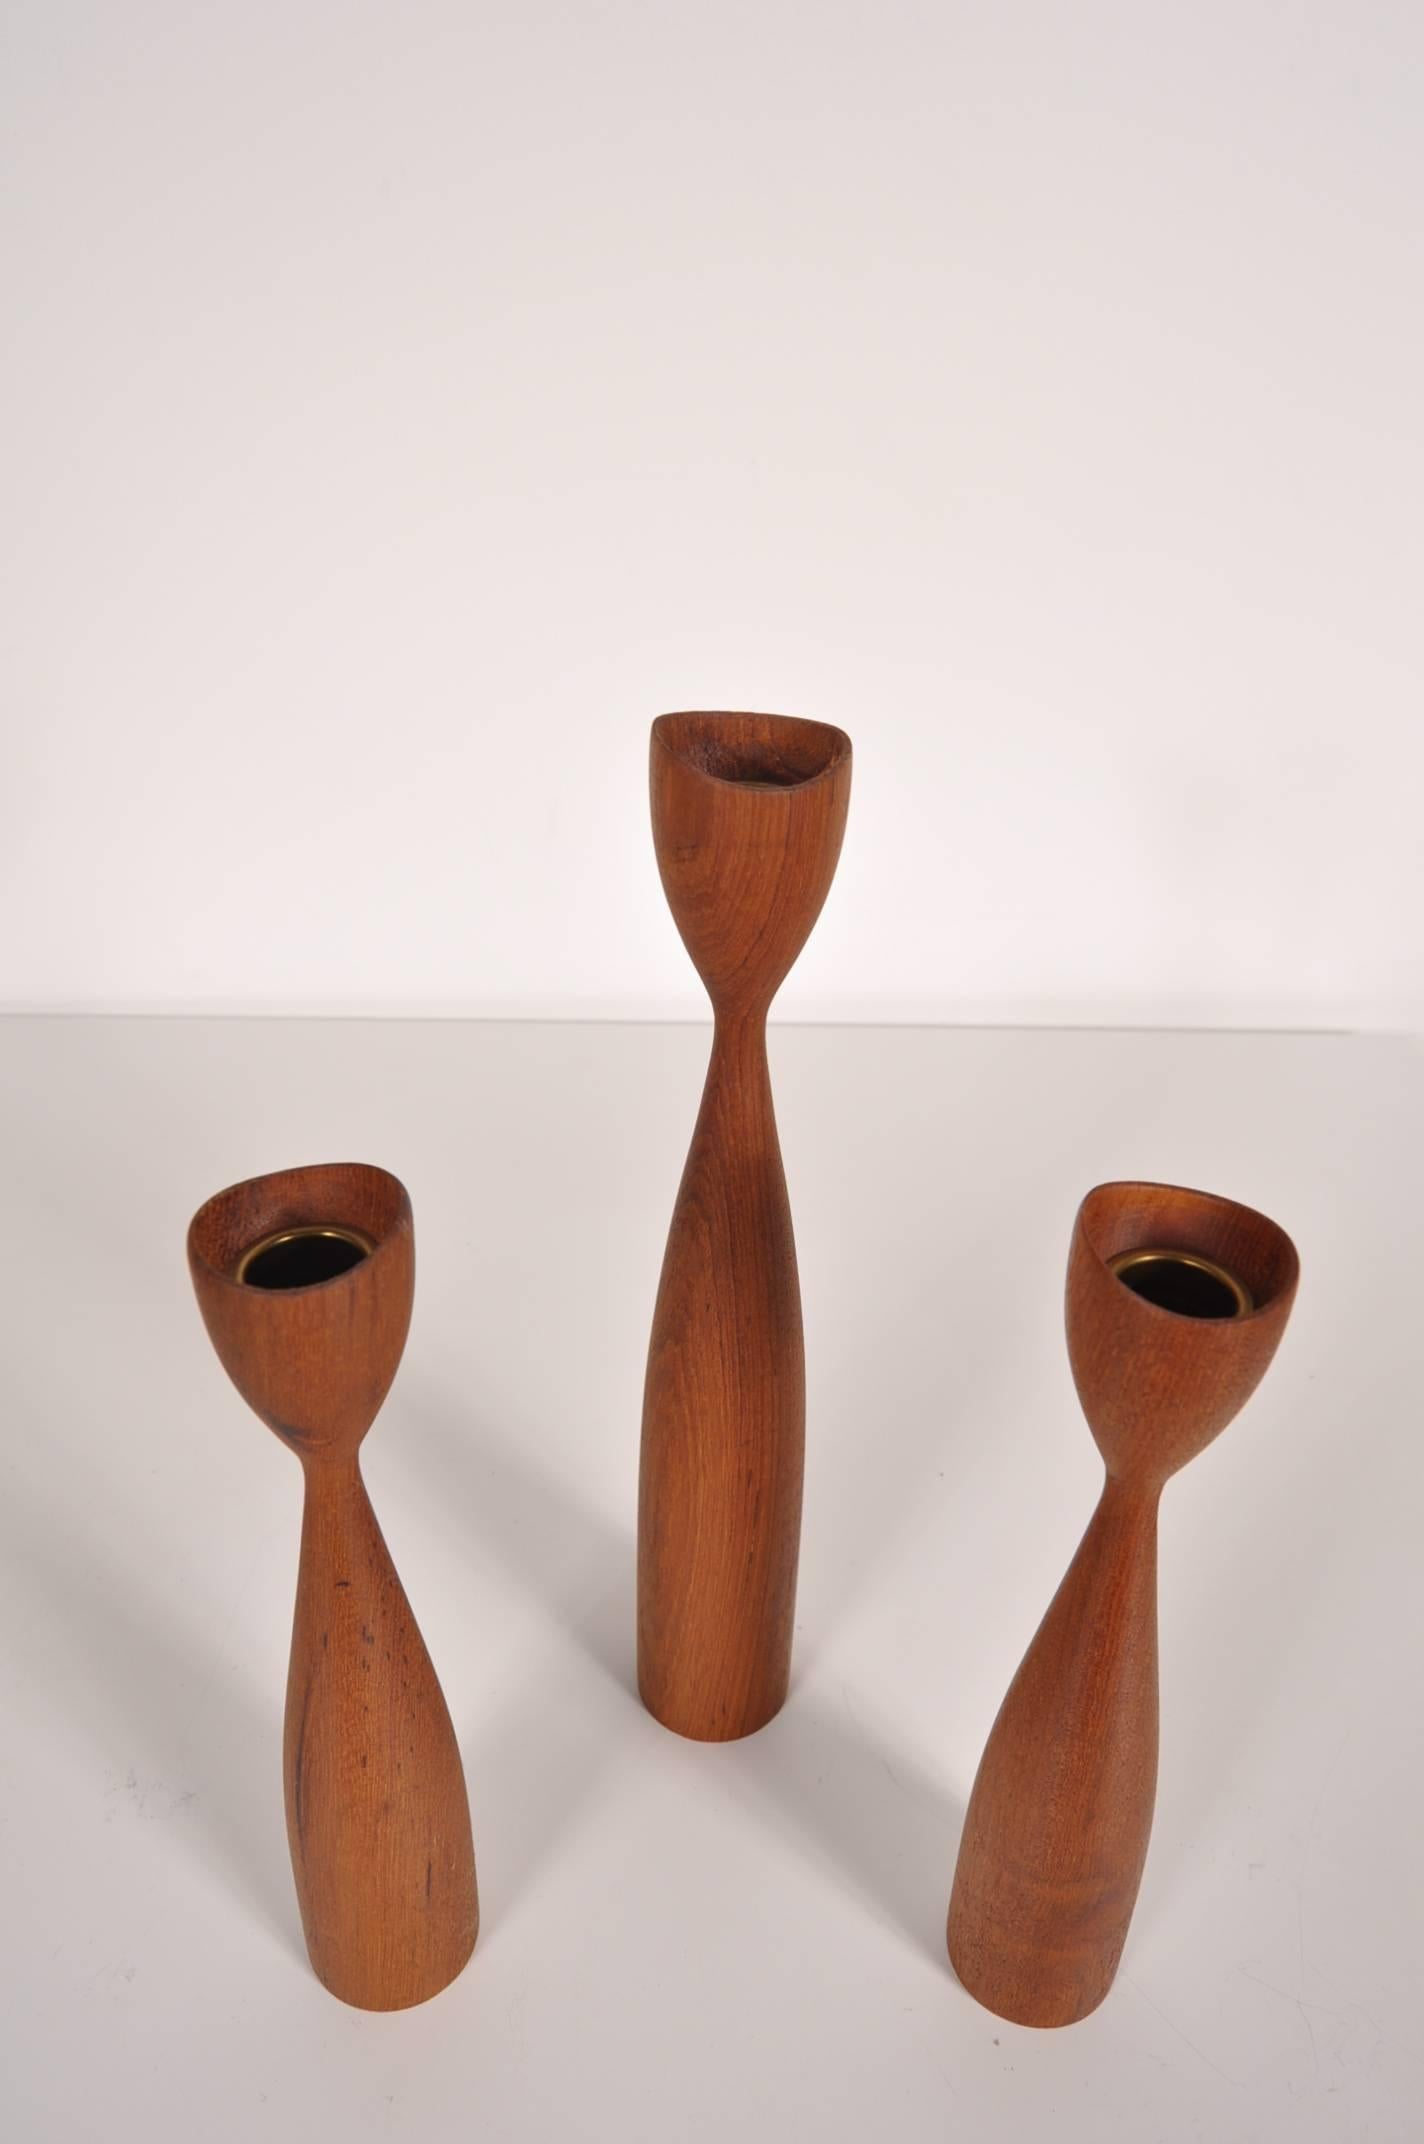 Beautiful set of three candle holders designed in the style of Rude Osolnik, made in Denmark, circa 1950.

These highly recognizable pieces of Danish design are made of high quality teak wood in a rich brown colour. The organic shape that they are